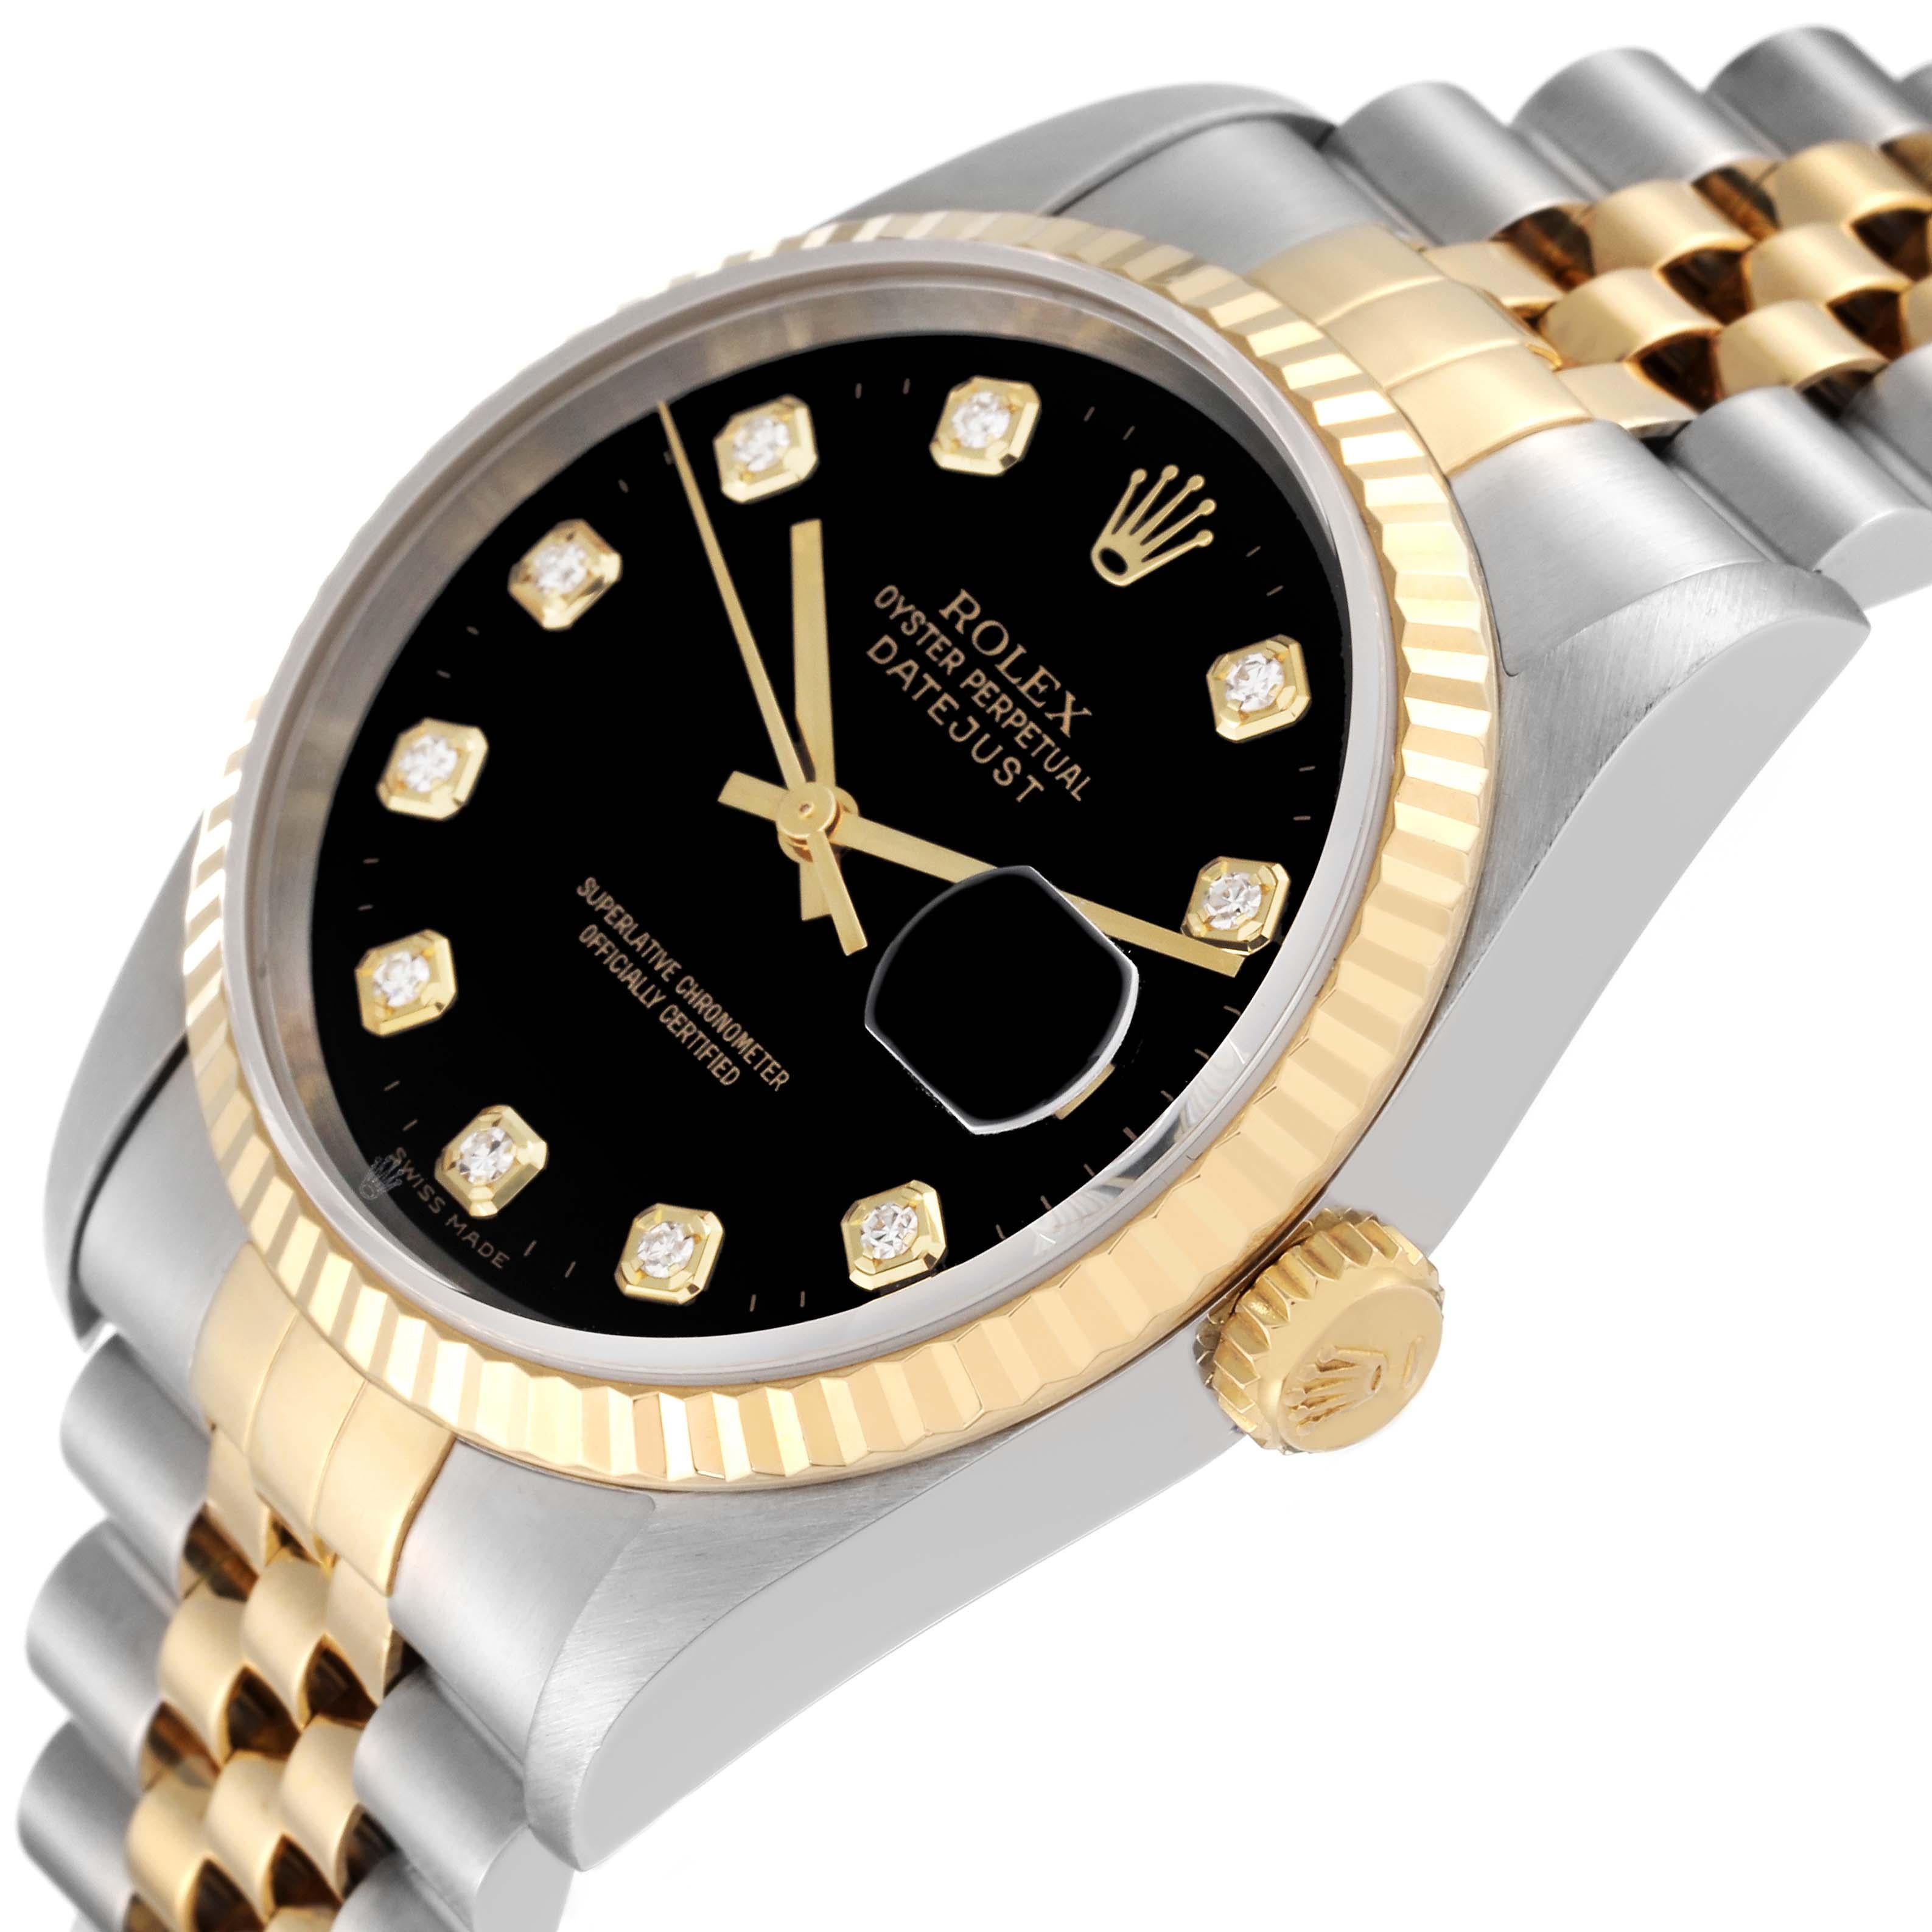 Rolex Datejust Steel Yellow Gold Black Diamond Dial Mens Watch 16233 Box Papers 1